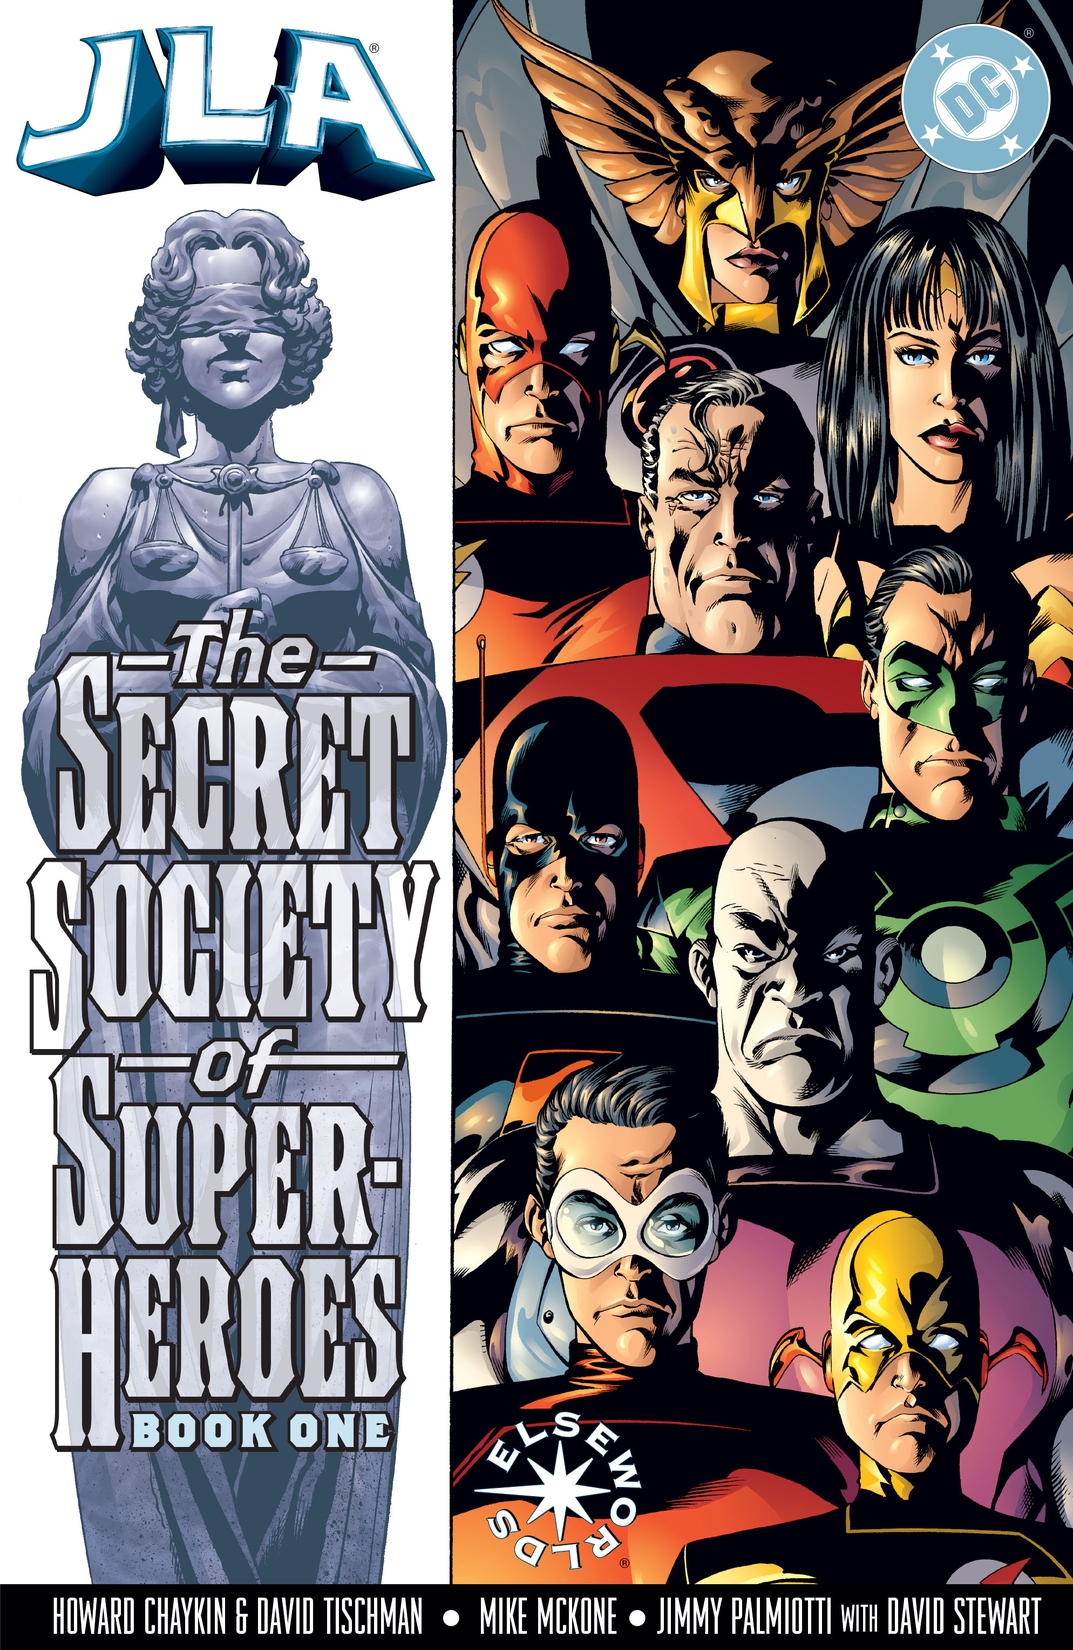 Secret Society of Superheroes (2000) #1 preview images